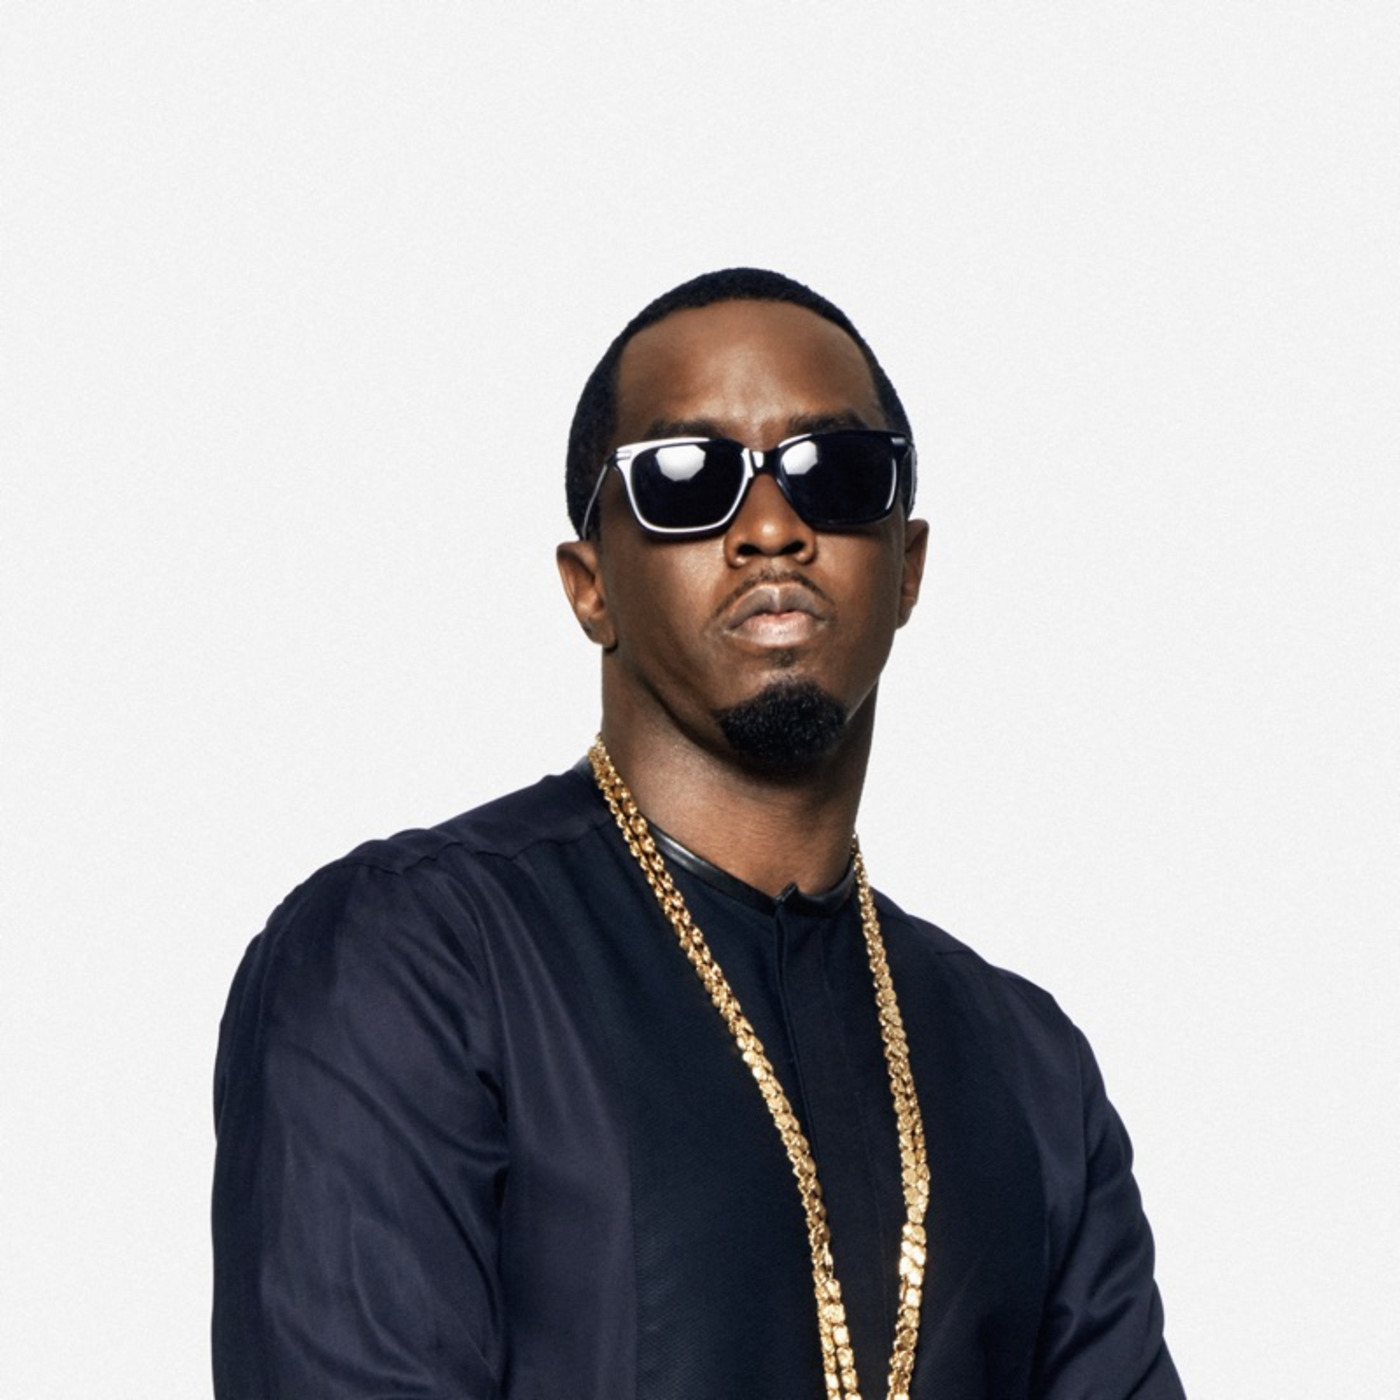 Mike Brown / Sean "Puff Daddy/P.Diddy/Diddy" Combs